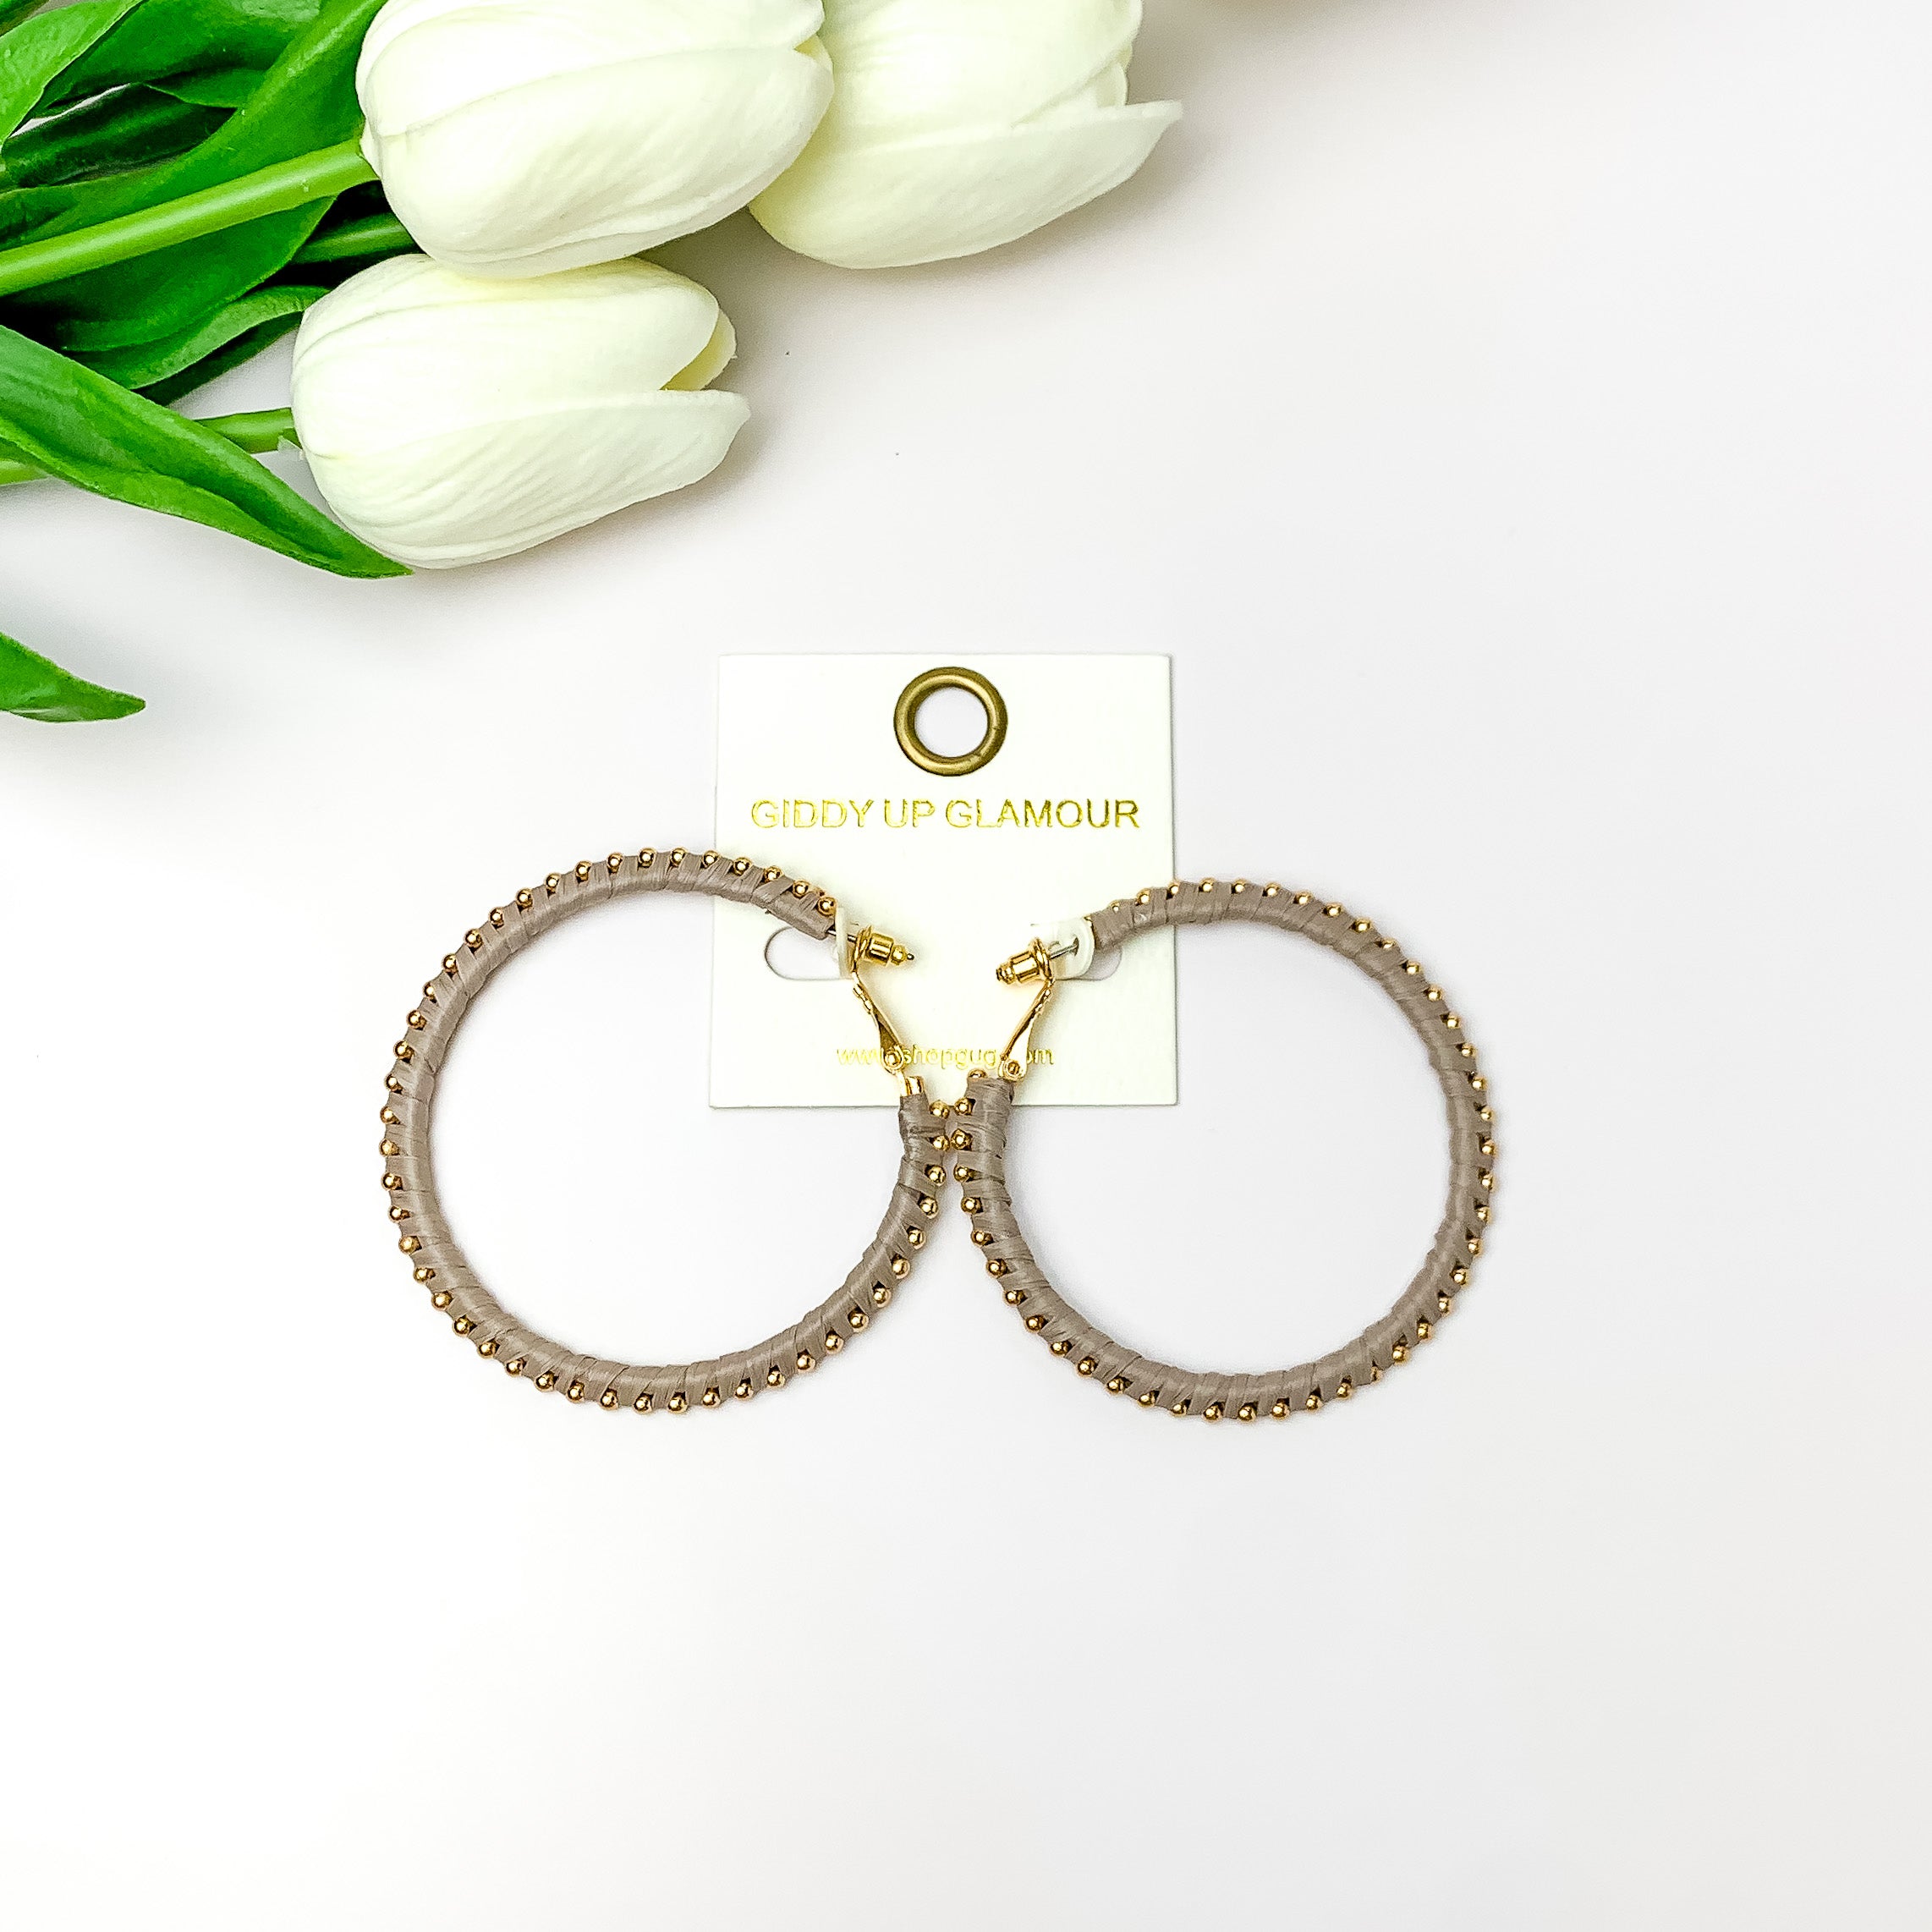 Pictured are circle grey hoop earrings with gold beads around it. They are pictured with white flowers on a white background